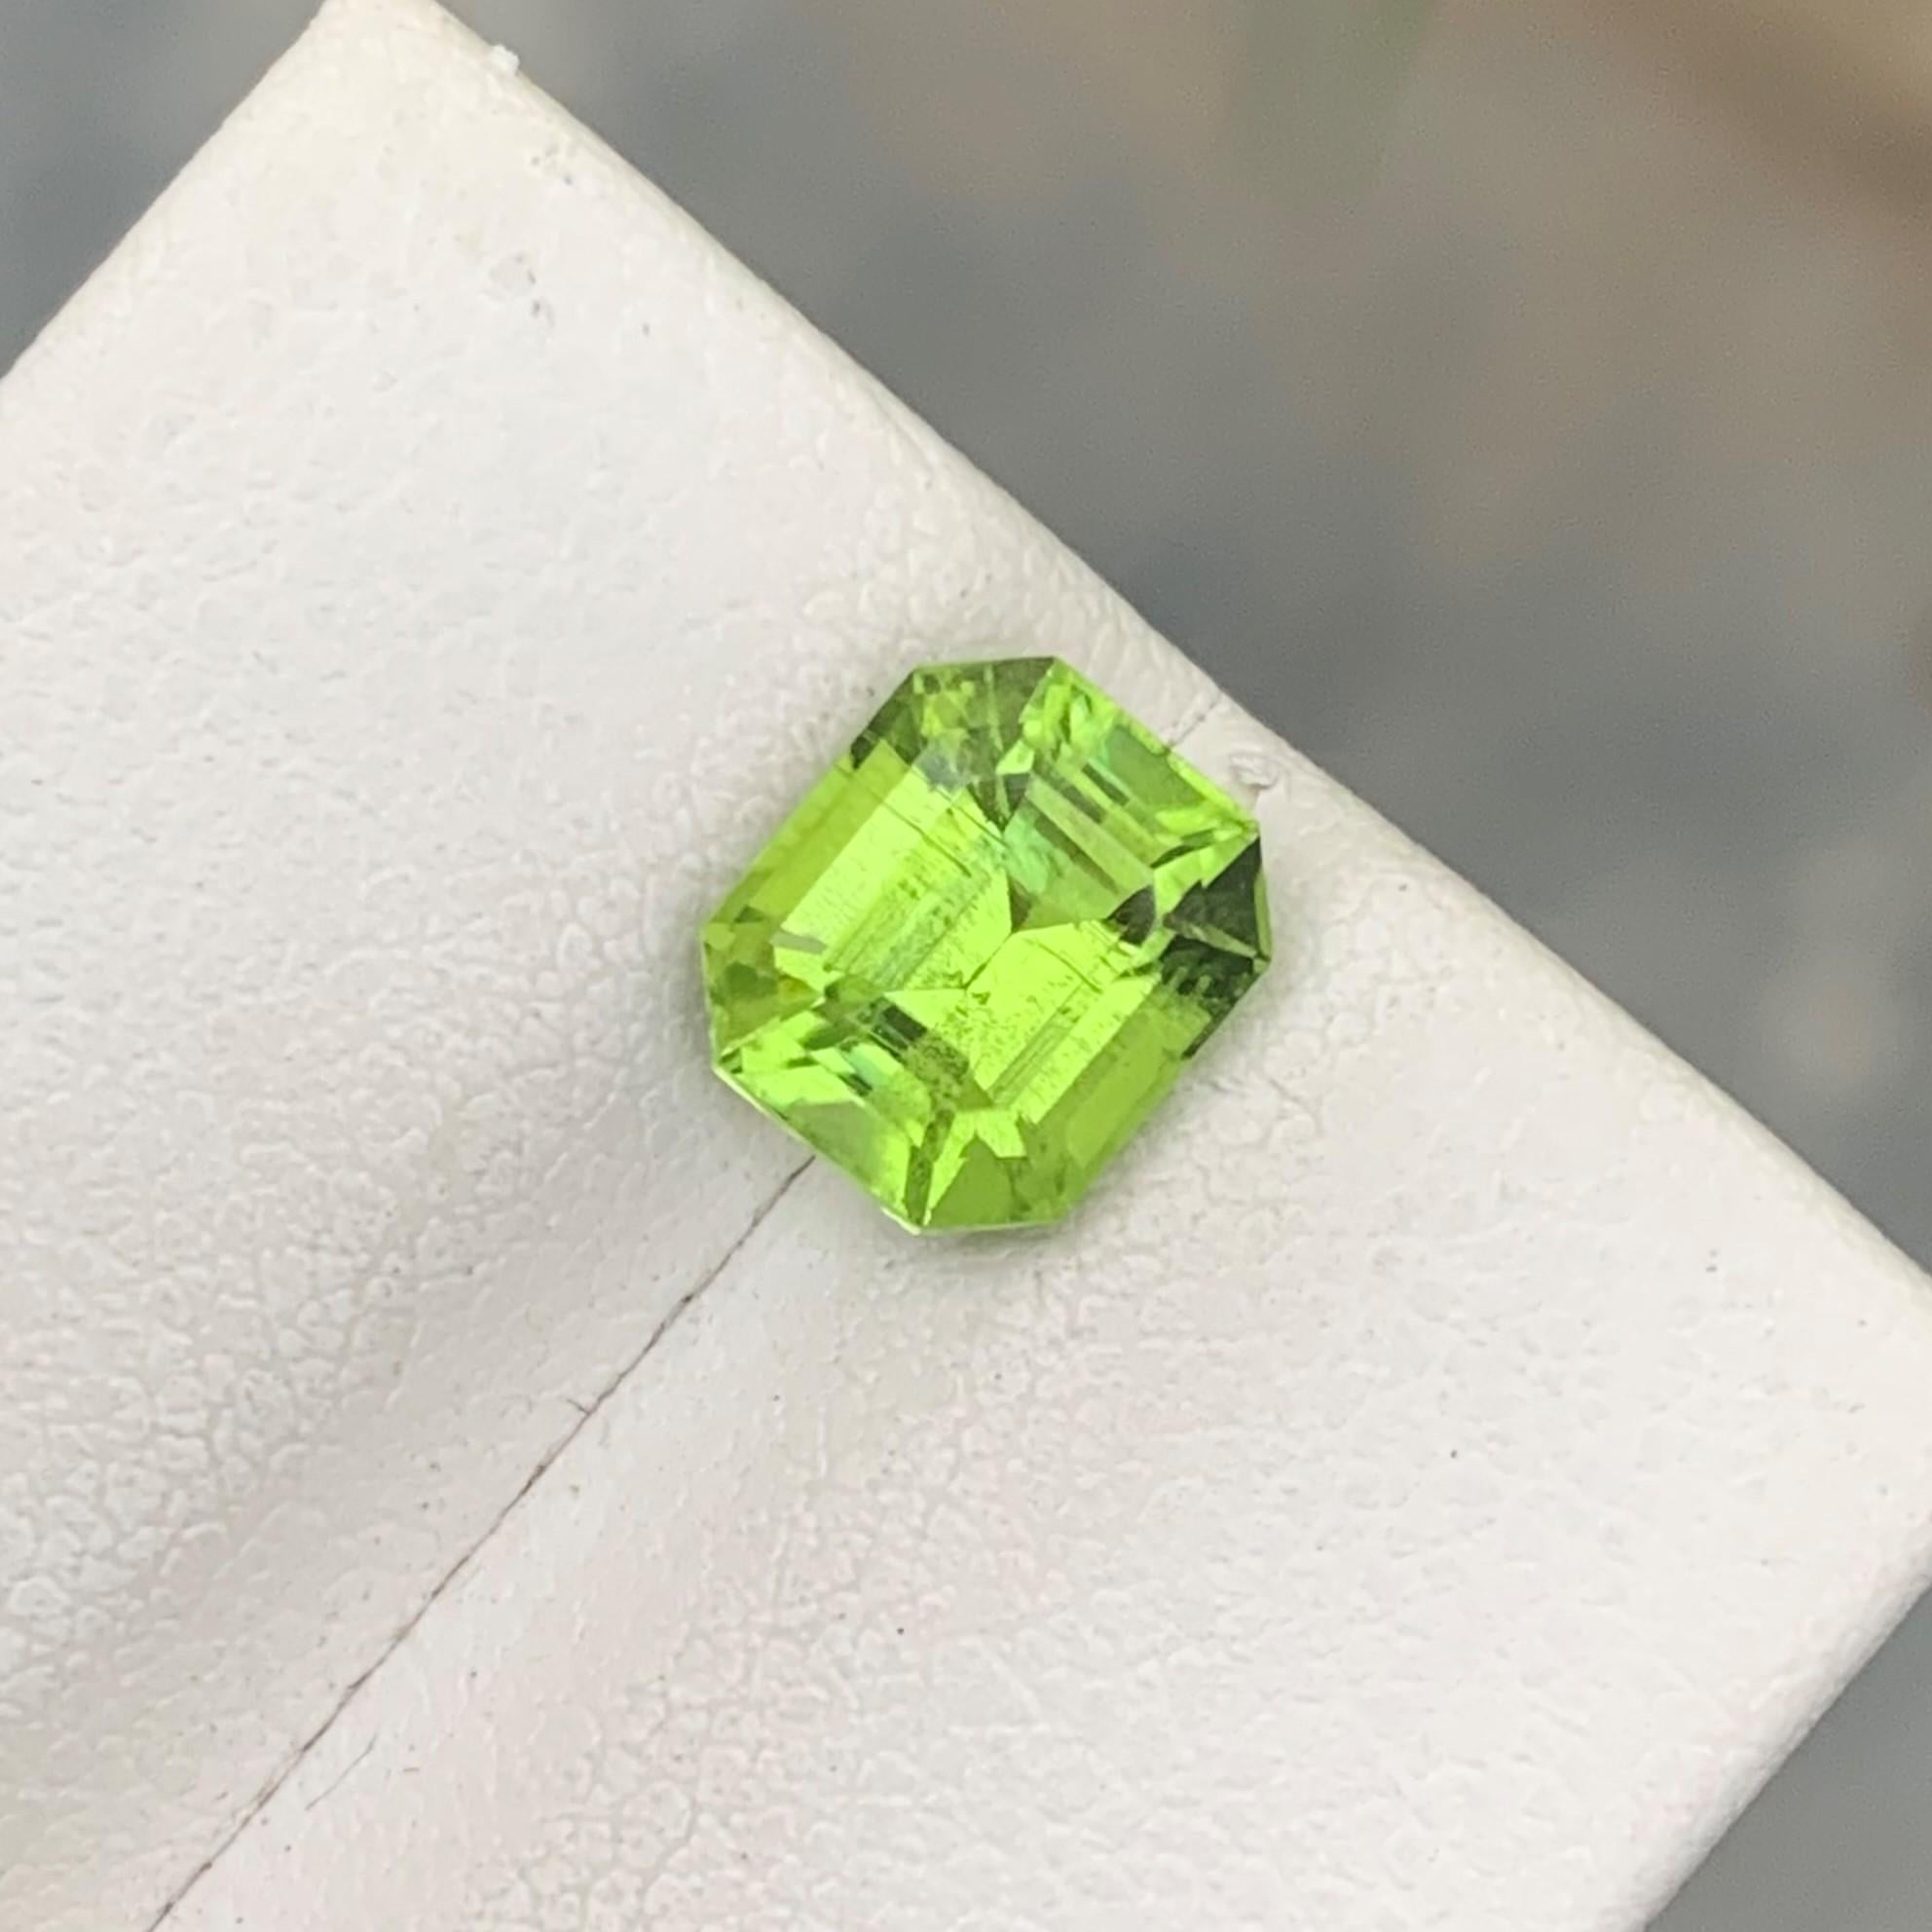 Gemstone Type : Peridot
Weight : 2.15 Carats
Dimension: 7.7x6.6x5.1 Mm 
Origin : Suppat Valley Pakistan
Clarity : Eye Clean
Certificate: On Demand
Color: Green
Treatment: Non
Shape: Emerald
It helps cure diseases related to lungs, breasts,